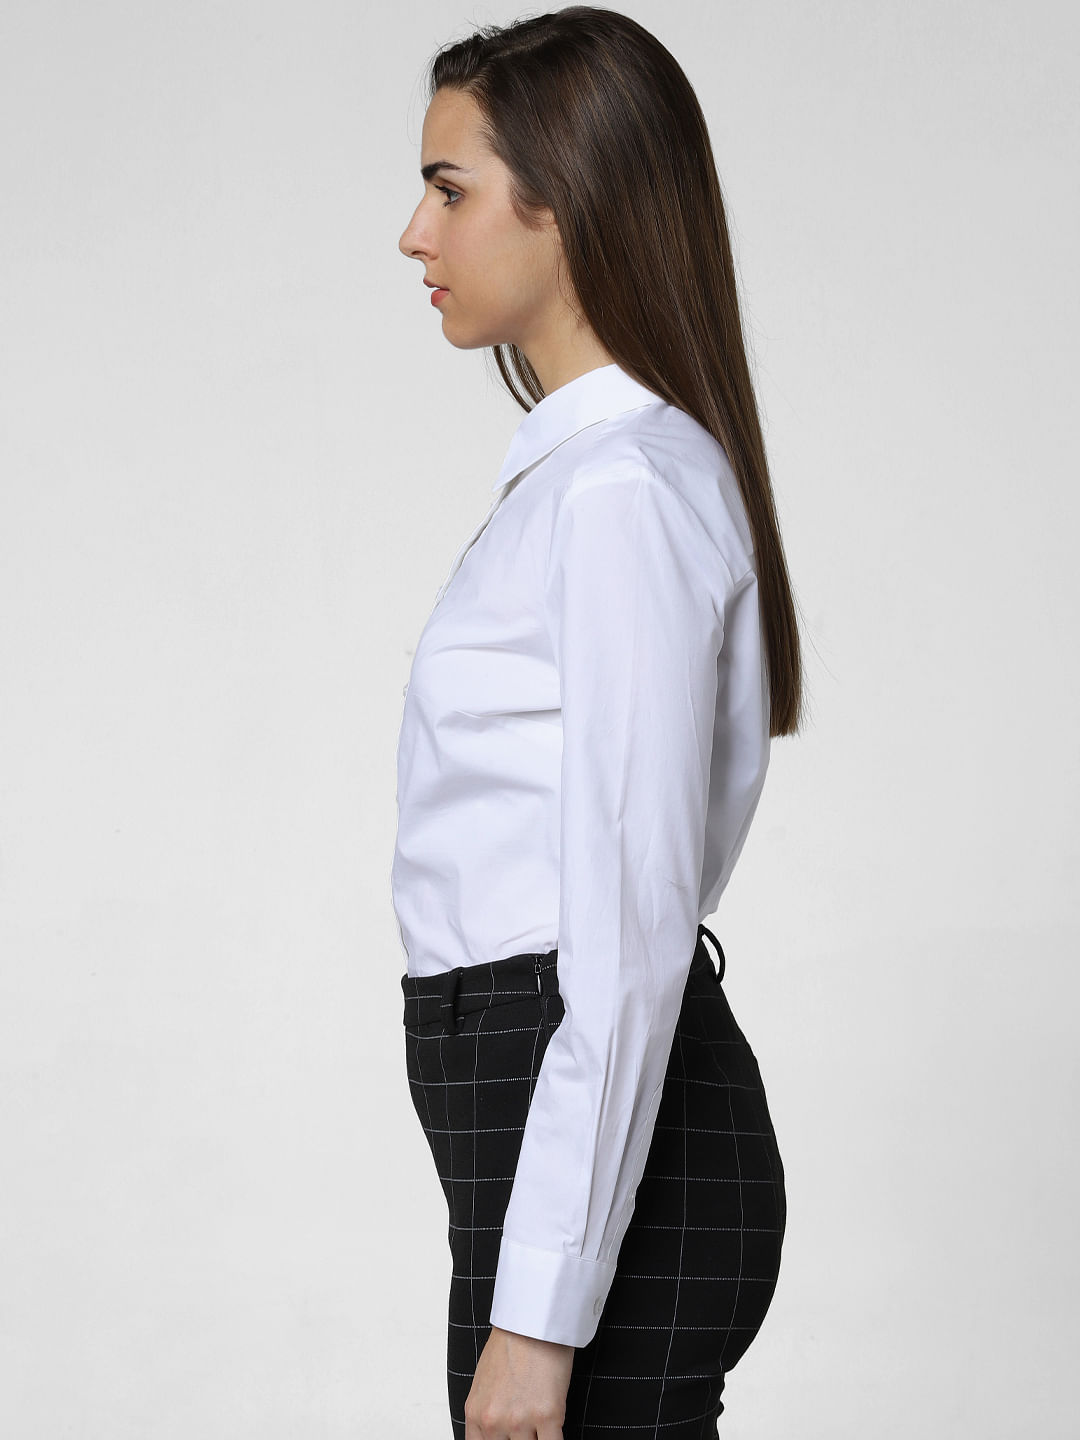 Beautiful, Elegant, Blonde Female Model Dressed in White Shirts and Tie and Black  Pants. Stock Image - Image of necktie, long: 112438409